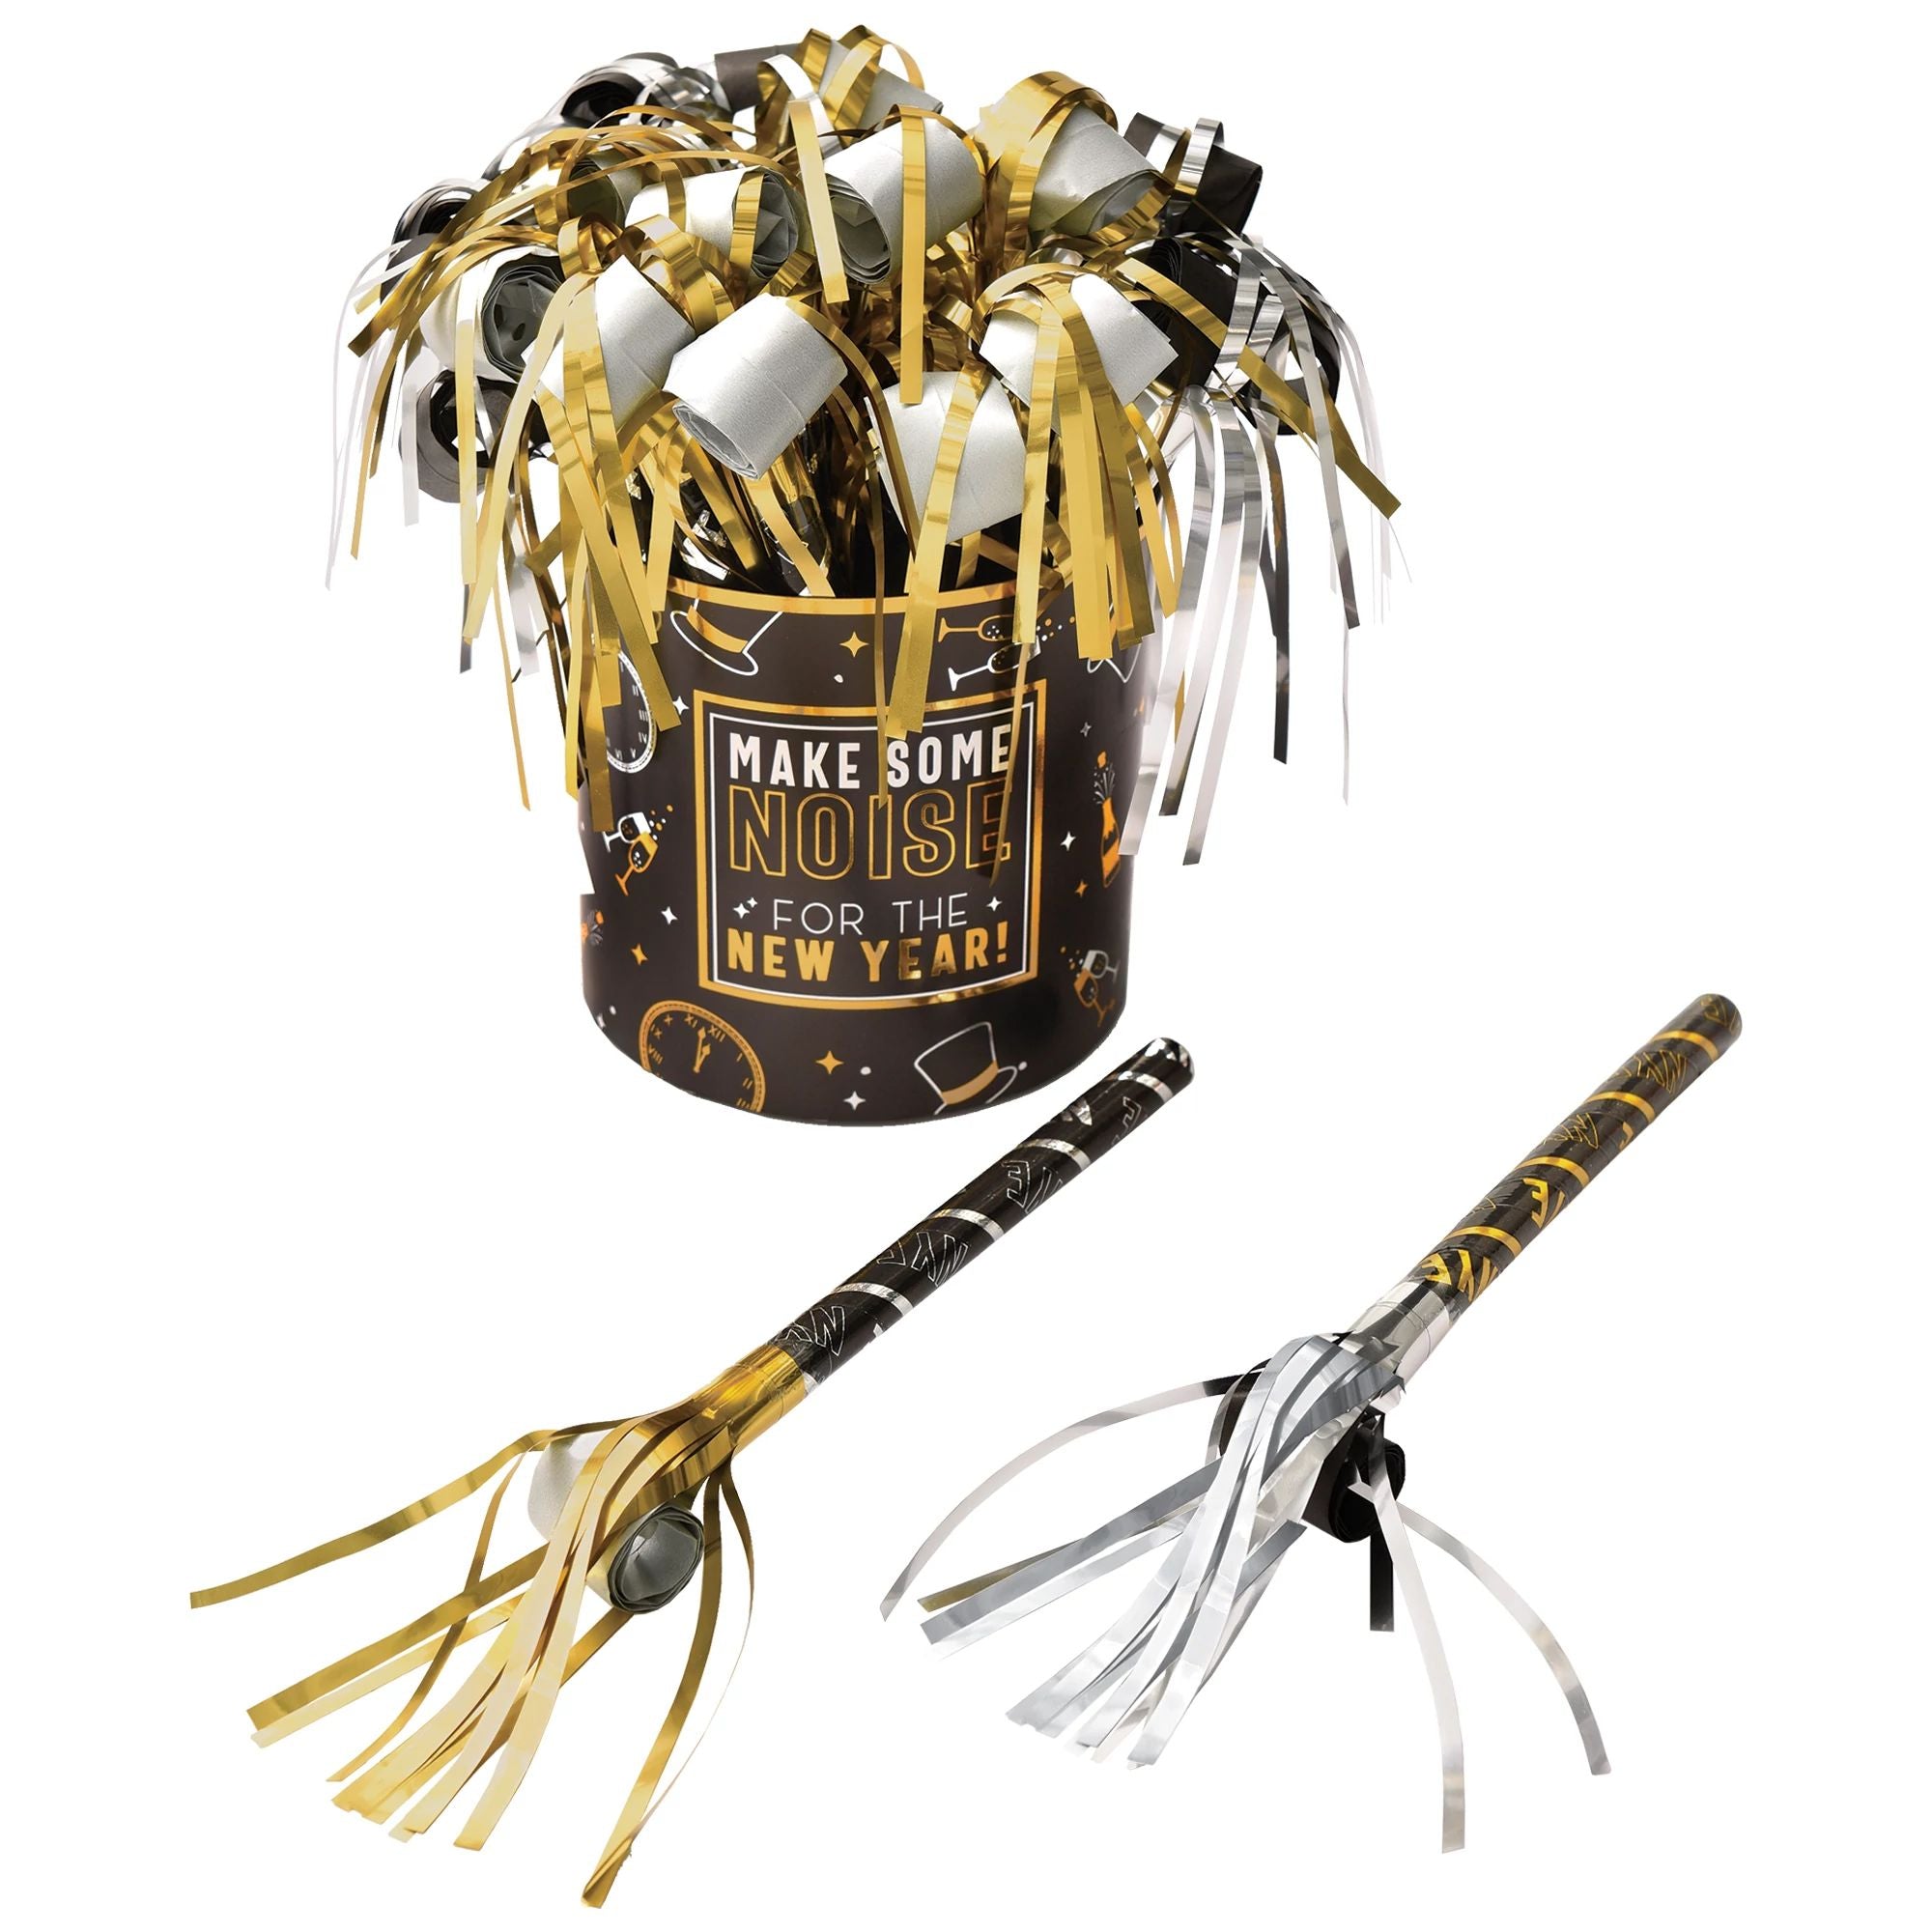 Amscan HOLIDAY: NEW YEAR'S Deluxe Blowouts Centerpiece - Black, Silver, Gold